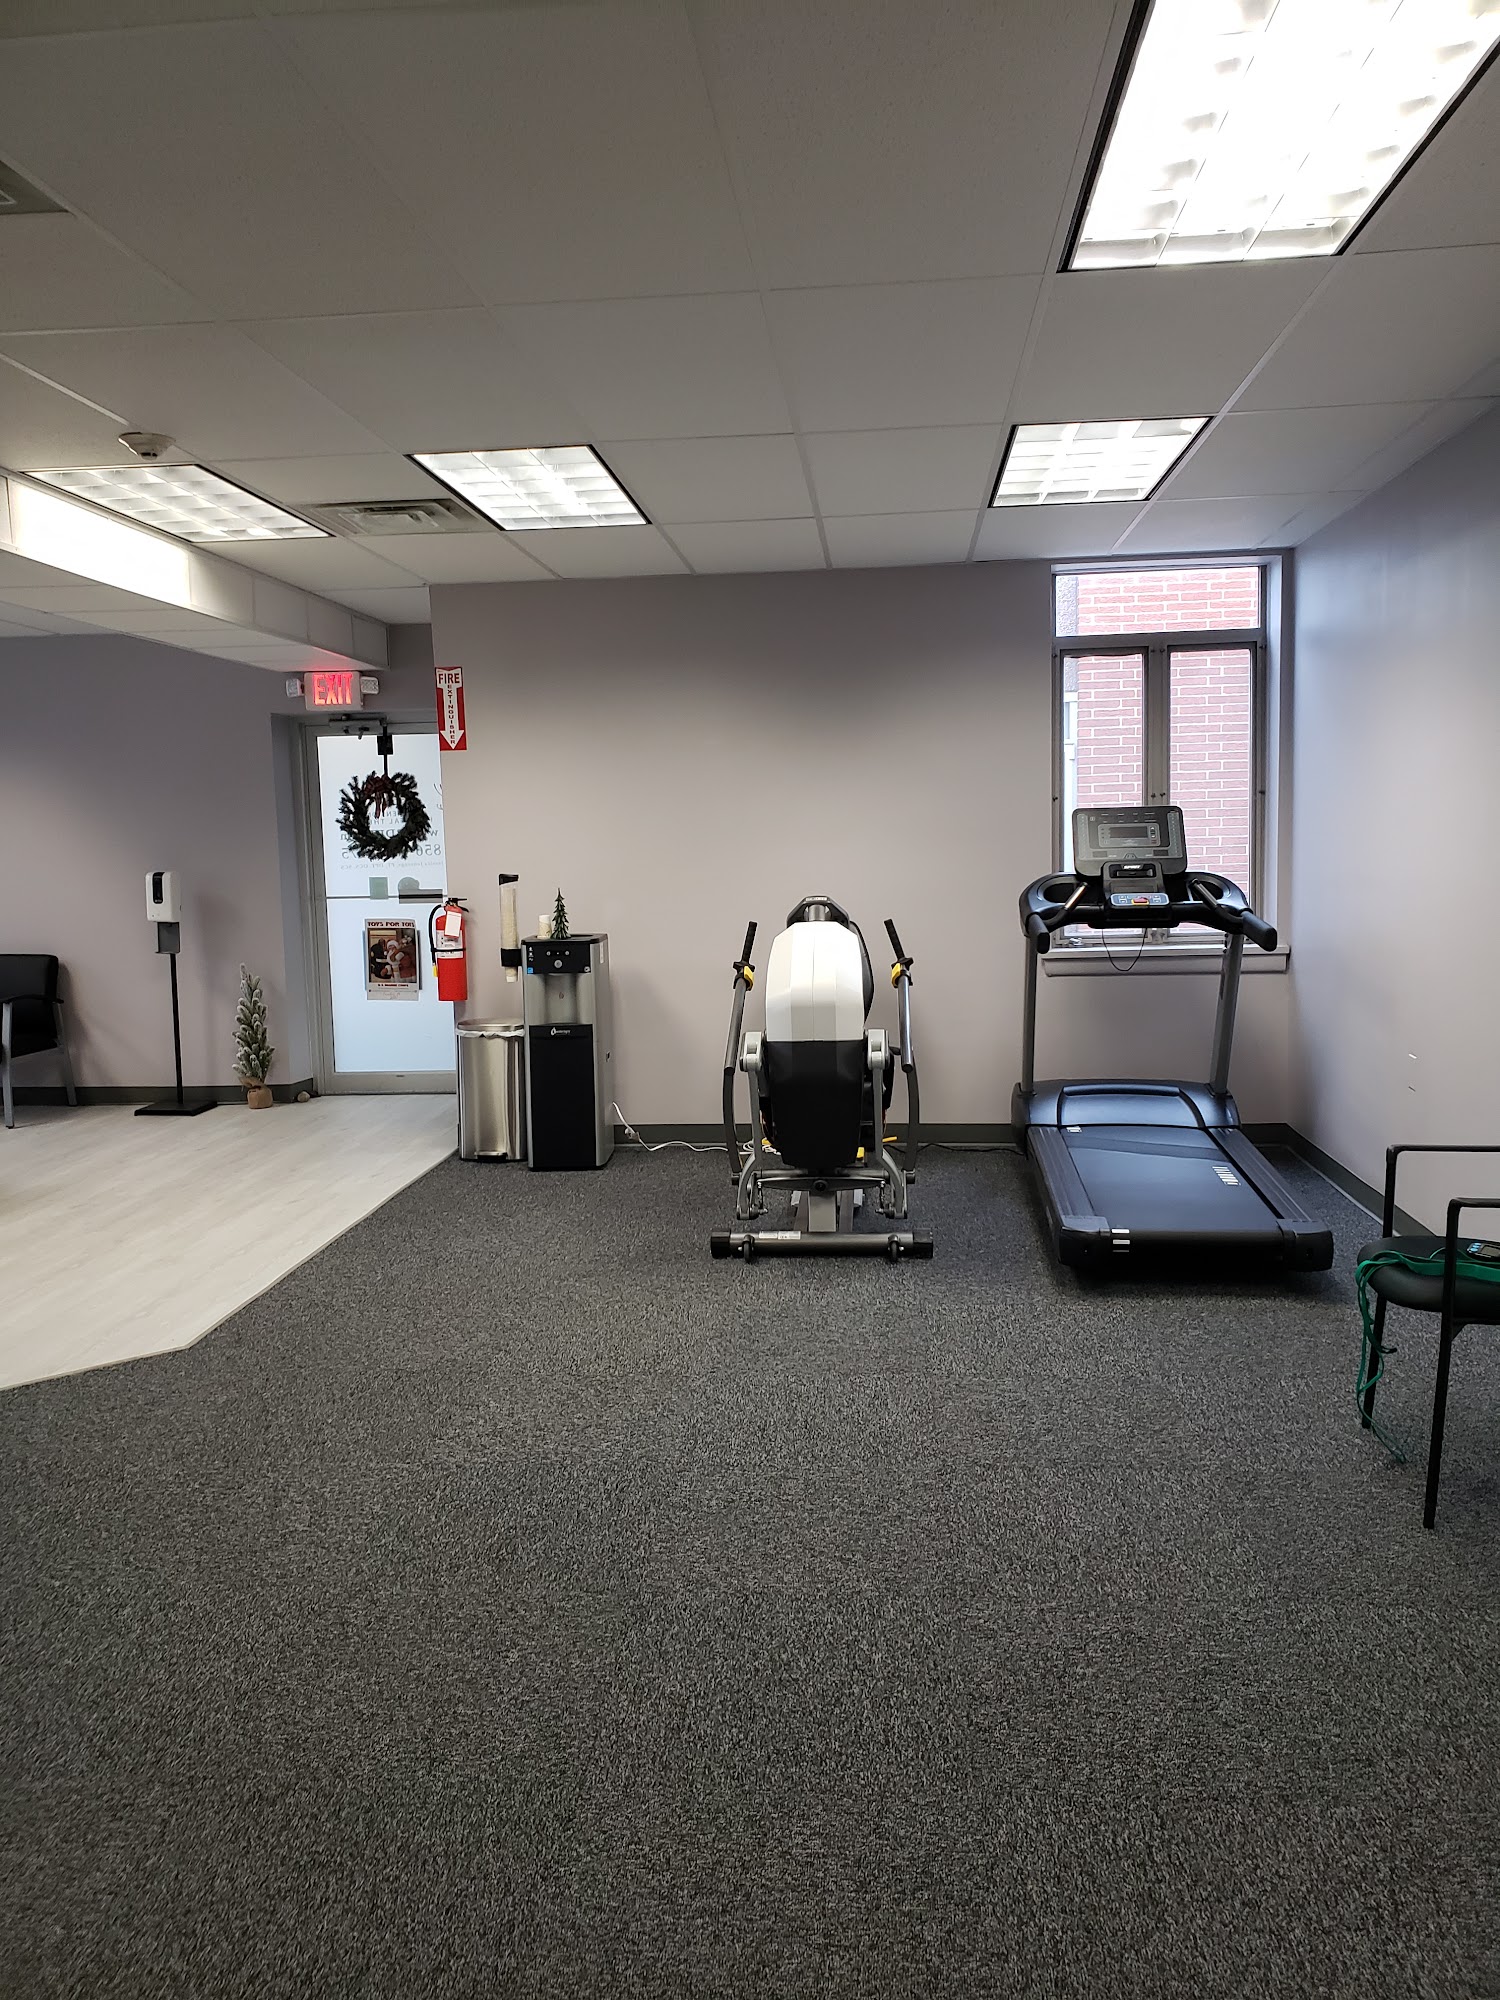 3DPT - 3 Dimensional Physical Therapy Haddon Heights